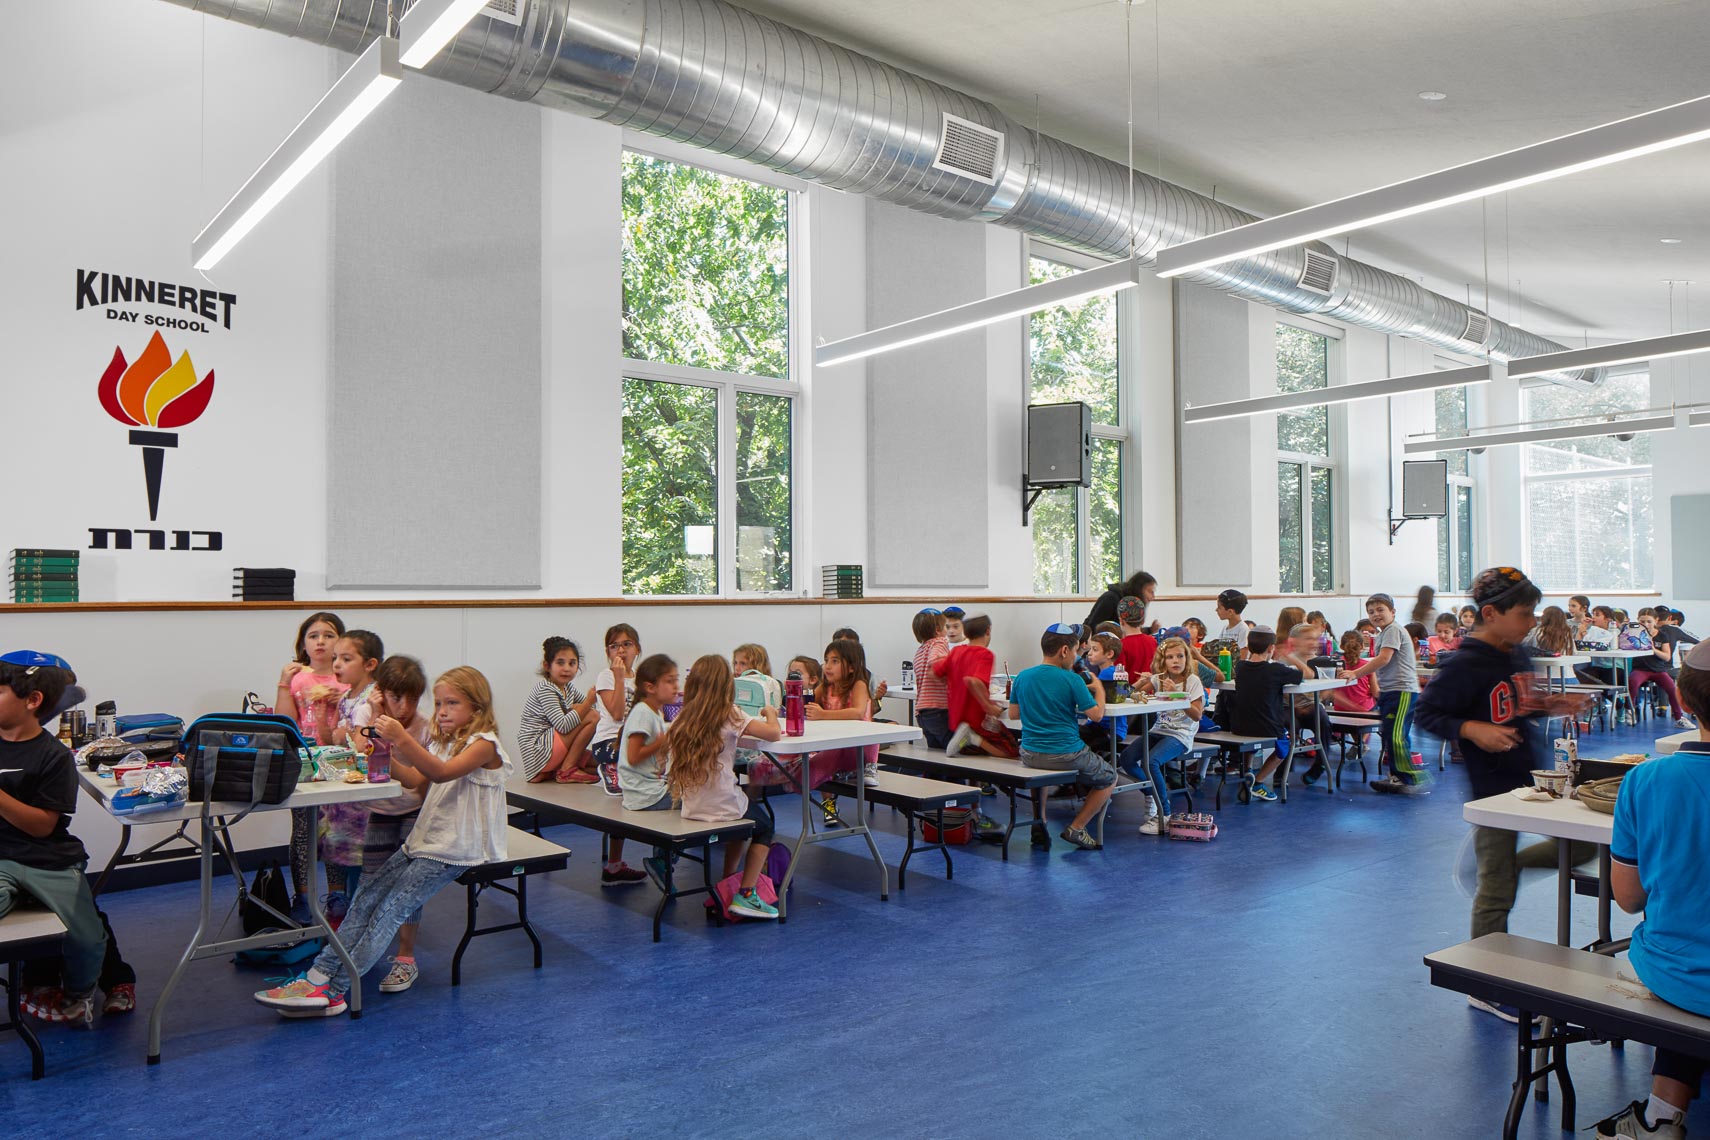 School children in a large lunch room